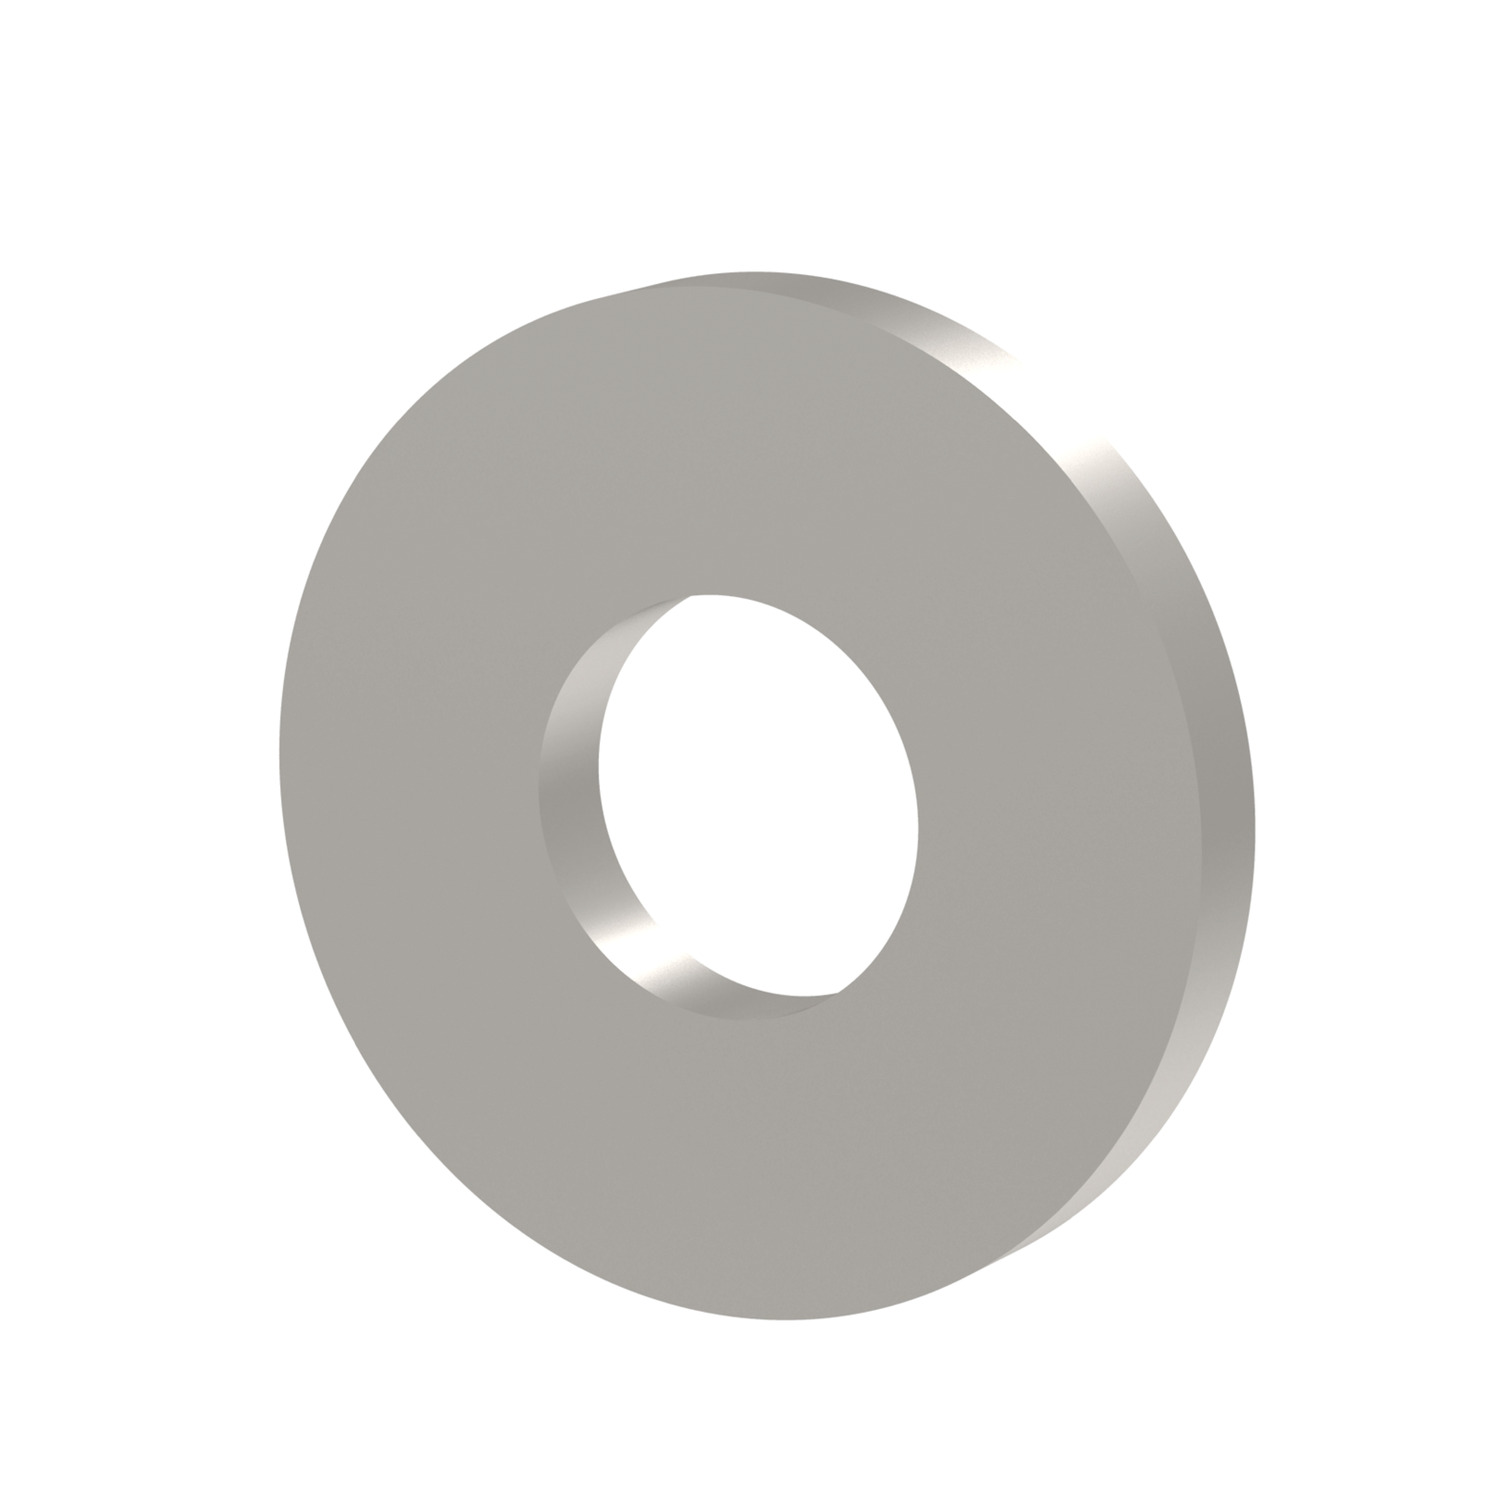 Form C Standard Form C washers available in steel, stainless steel and zinc palted steel.